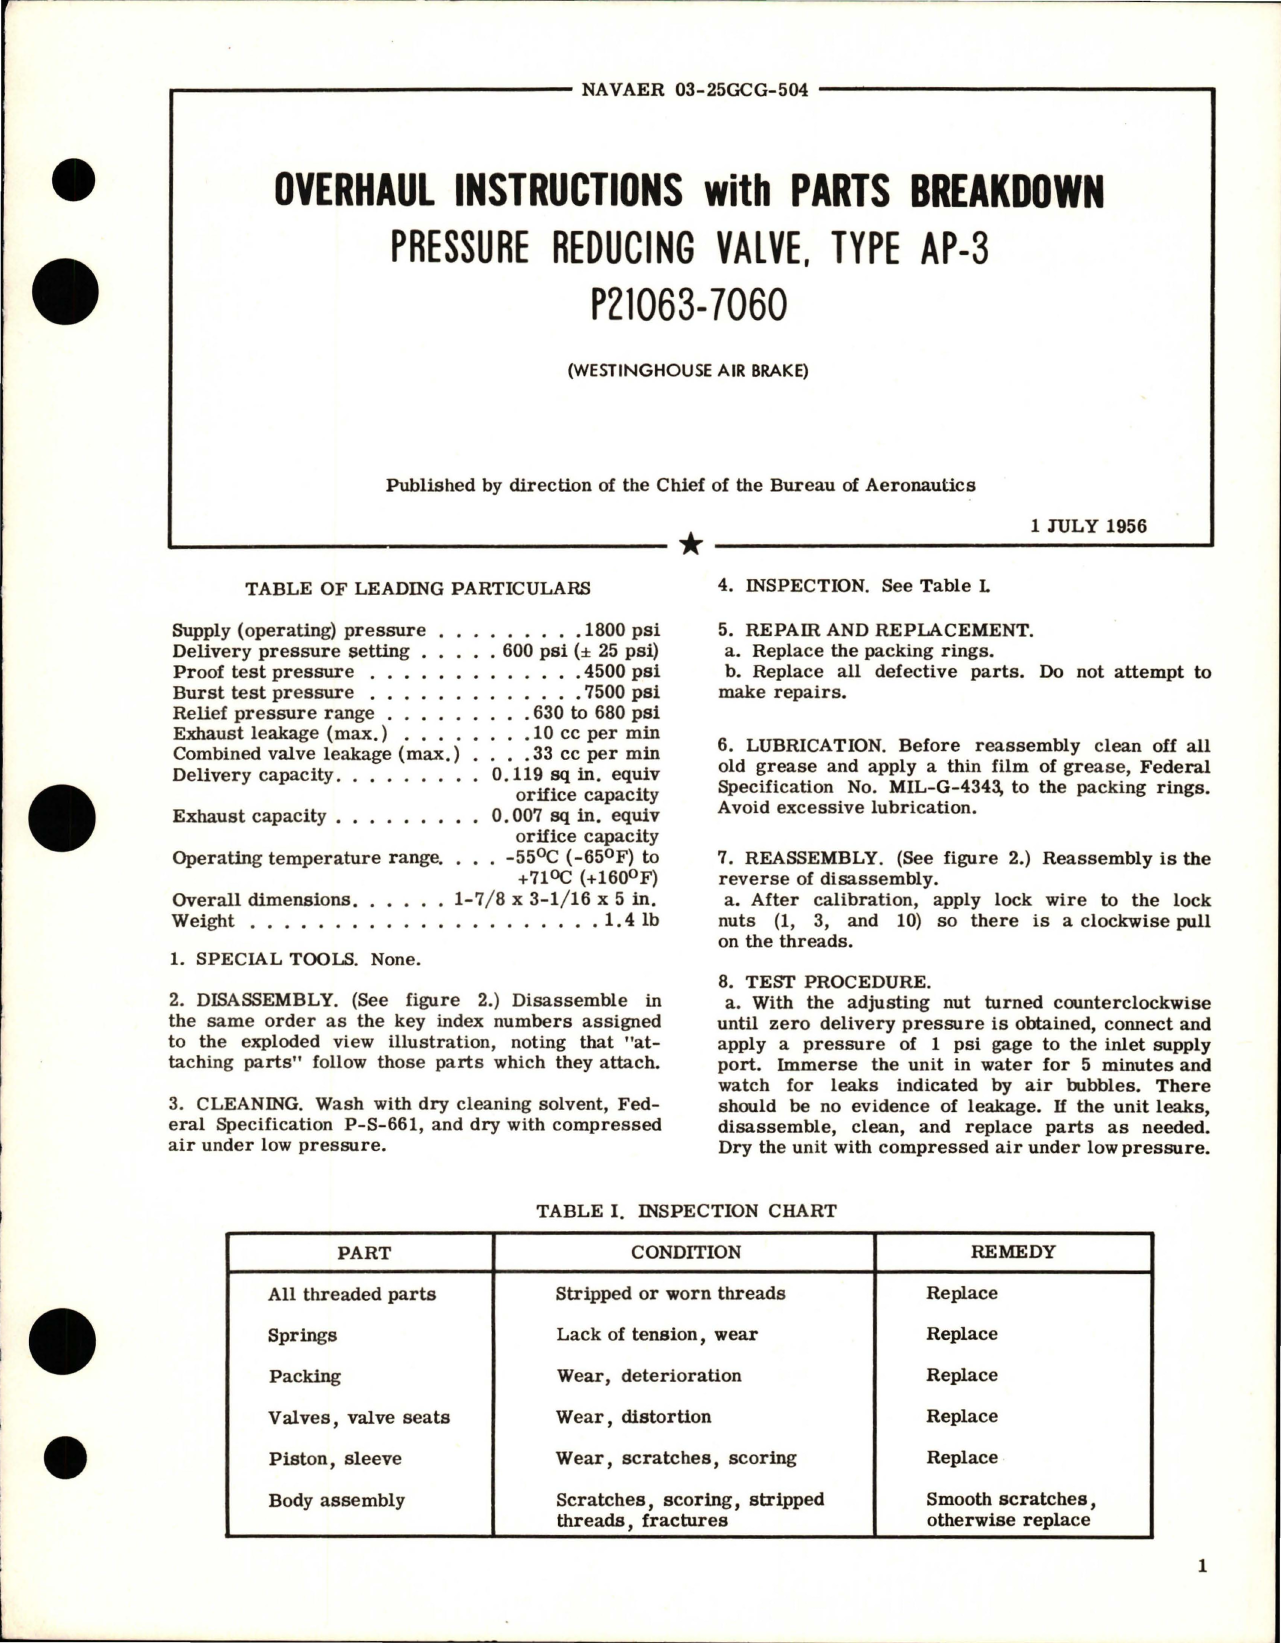 Sample page 1 from AirCorps Library document: Overhaul Instructions with Parts Breakdown for Type AP-3 Pressure Reducing Valve - P21063-7060